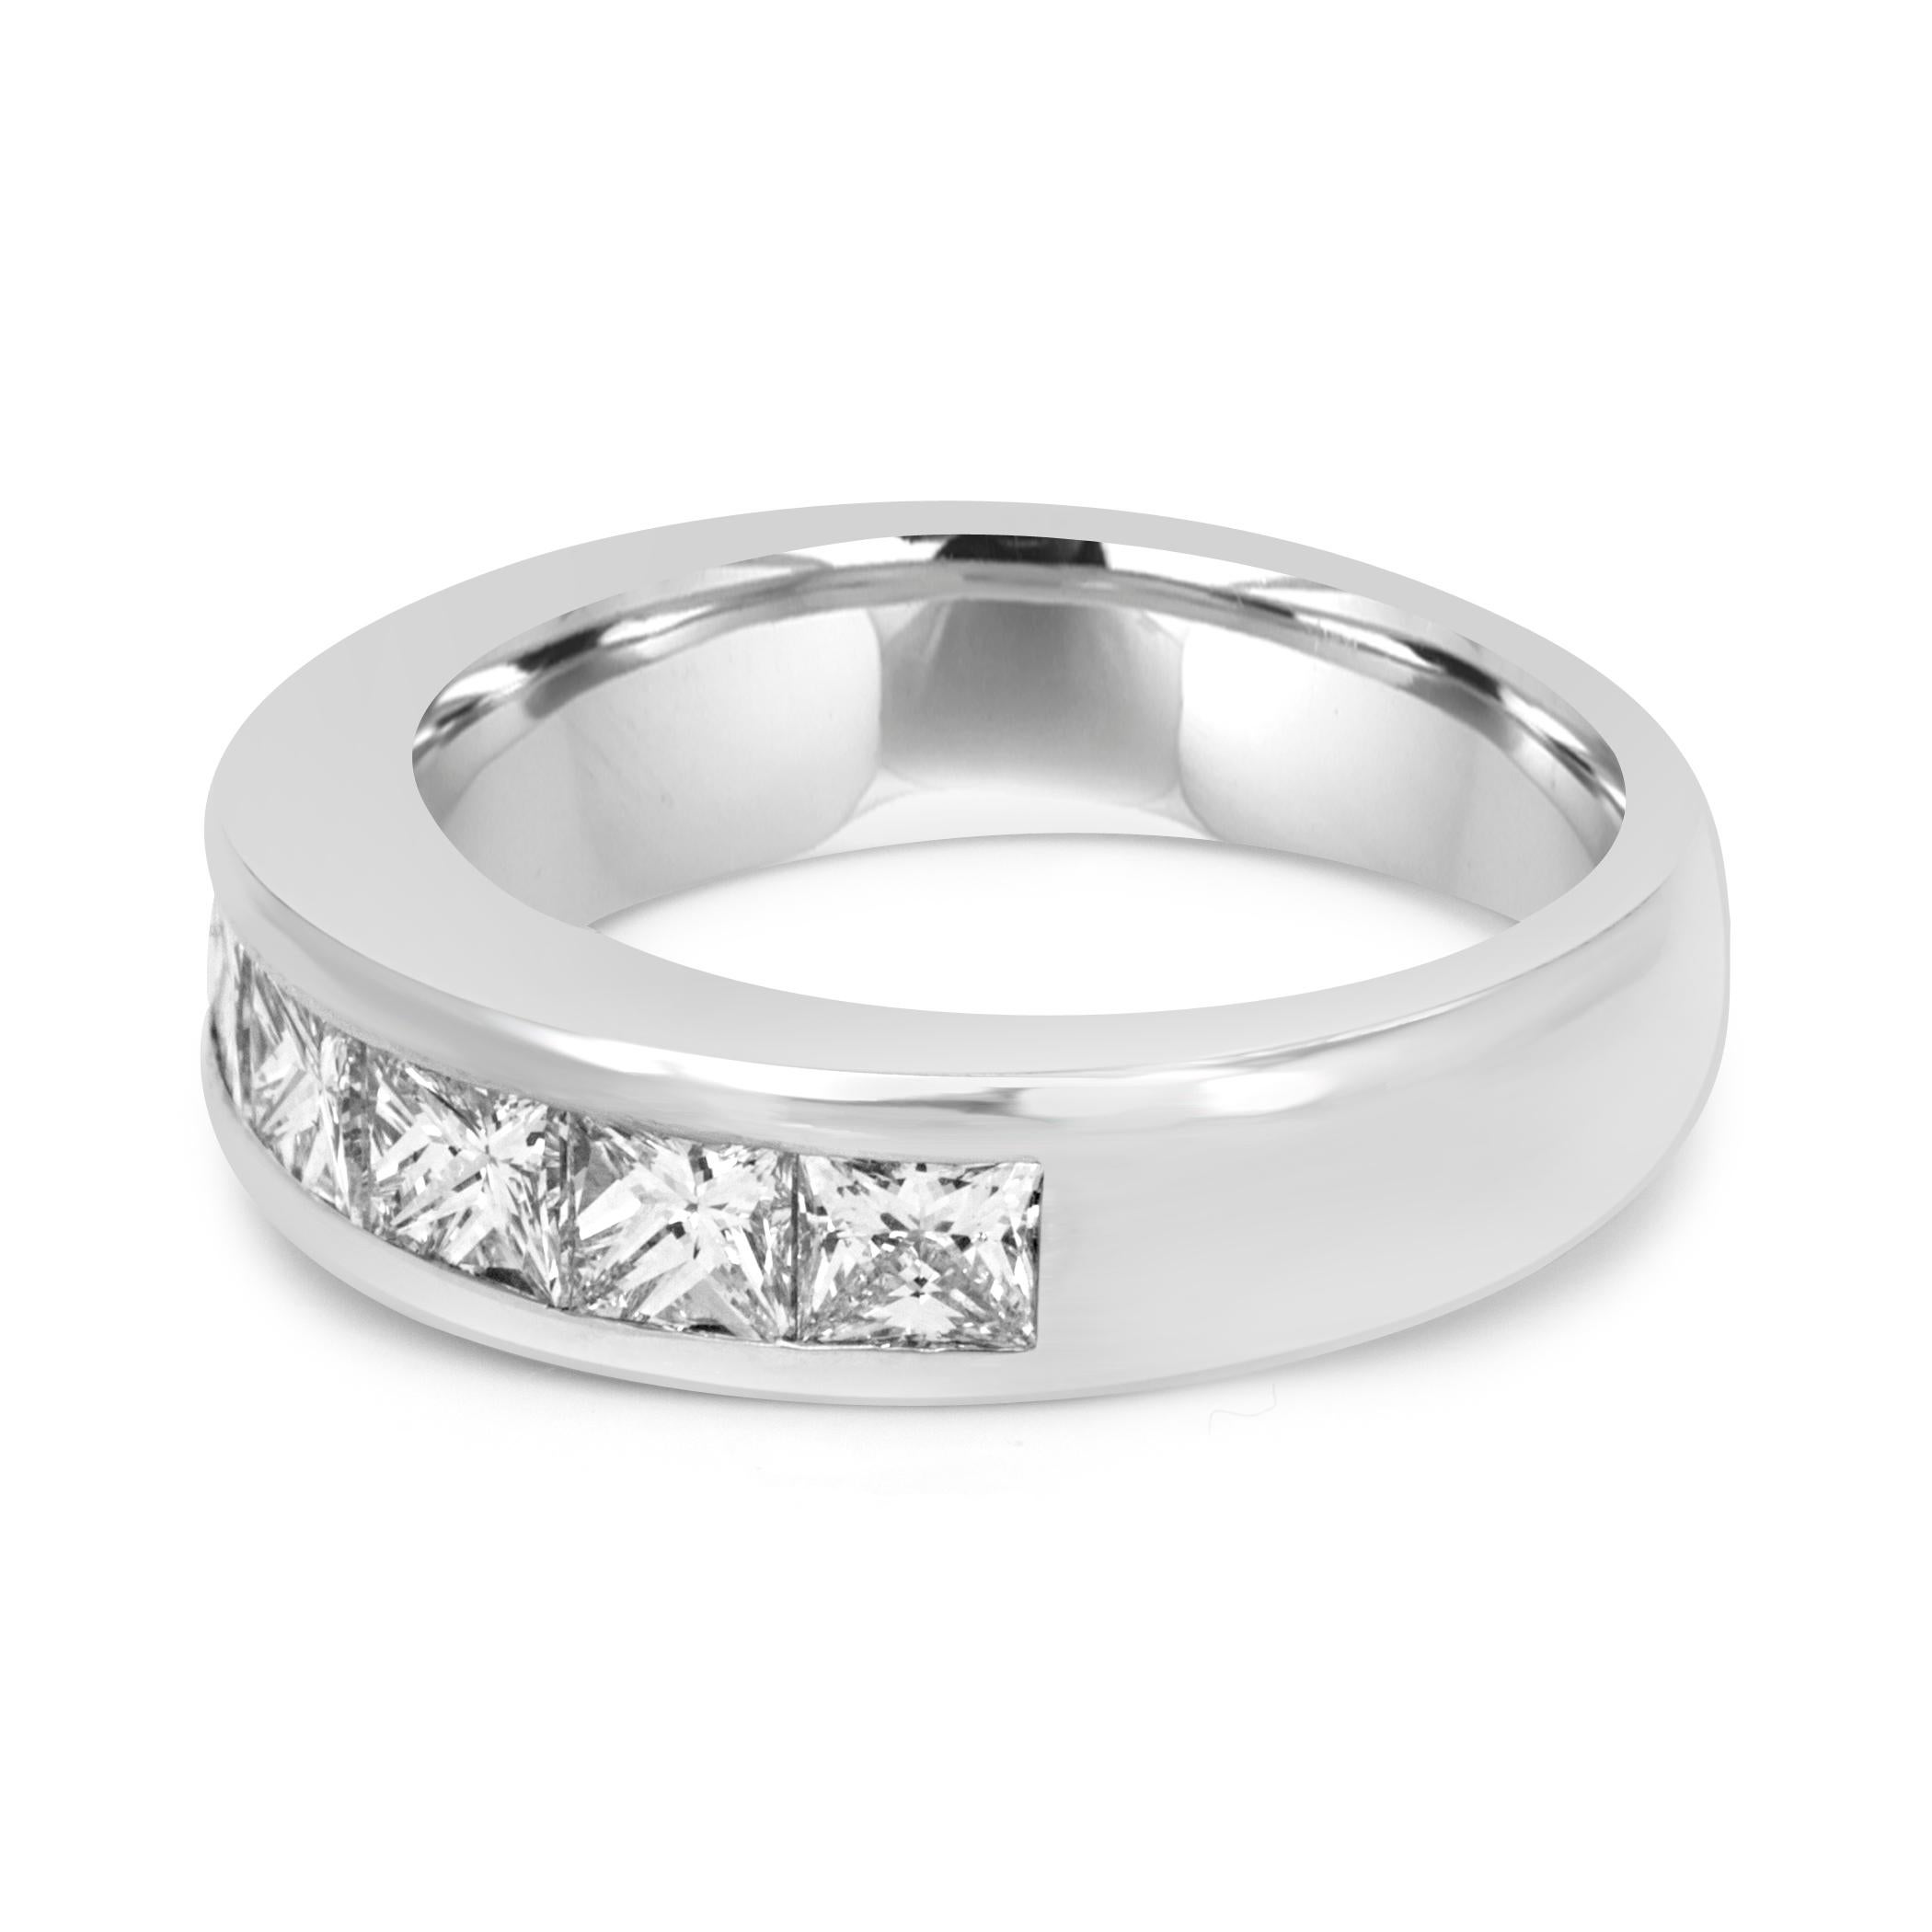 7 White G-H Color VS-SI Clarity Princess Cut Diamond 1.50 Carat Set in Classic yet Chic always in style channel set  Fashion Cocktail Wedding Band Ring in Platinum.

Style available in different price ranges. Prices are based on your selection of